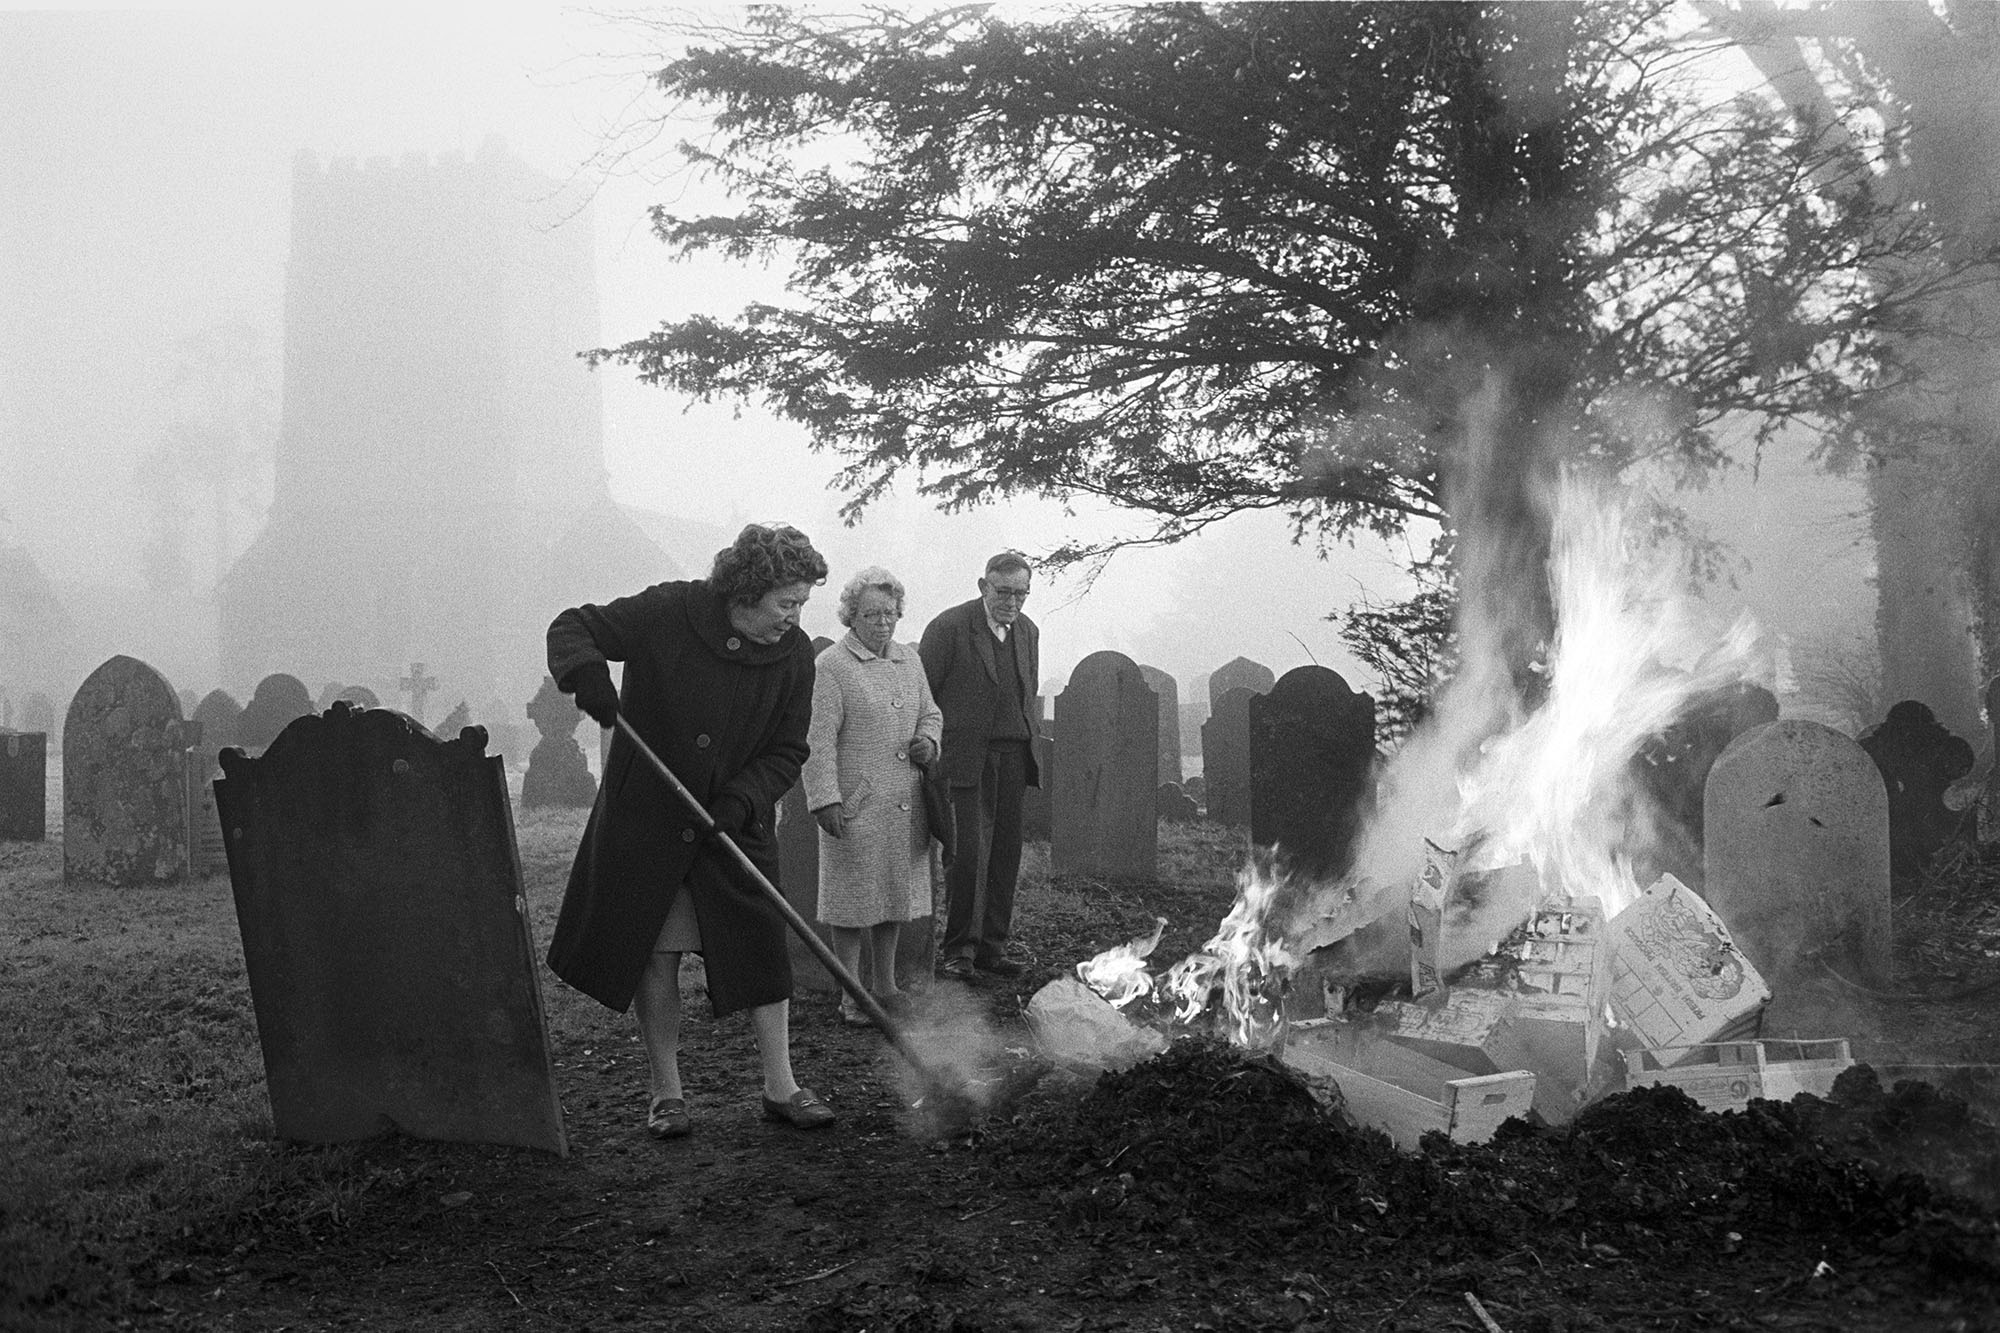 James Ravilious on Twitter: &quot;The Friend family burning rubbish in the  churchyard, Dolton Church, December 1983. Photograph by my Dad ©Beaford  Arts @beaford #Devon #photography #church https://t.co/9NZKTw8yUu  https://t.co/AQeVOyzxr8&quot; / Twitter